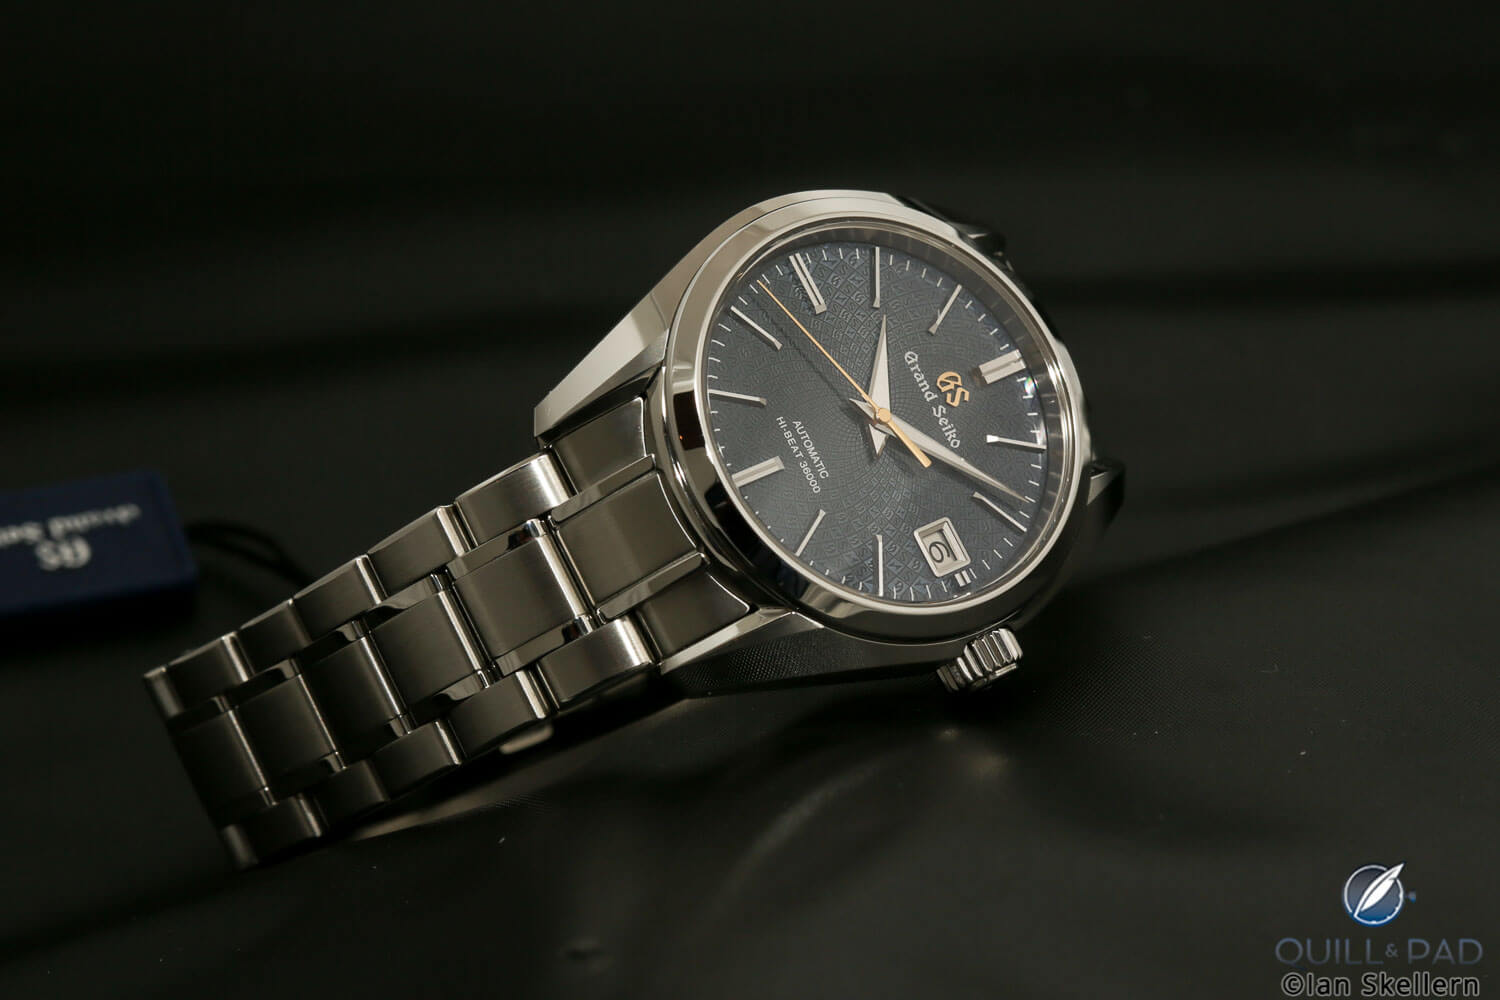 Grand Seiko Hi-Beat 36000 in stainless steel